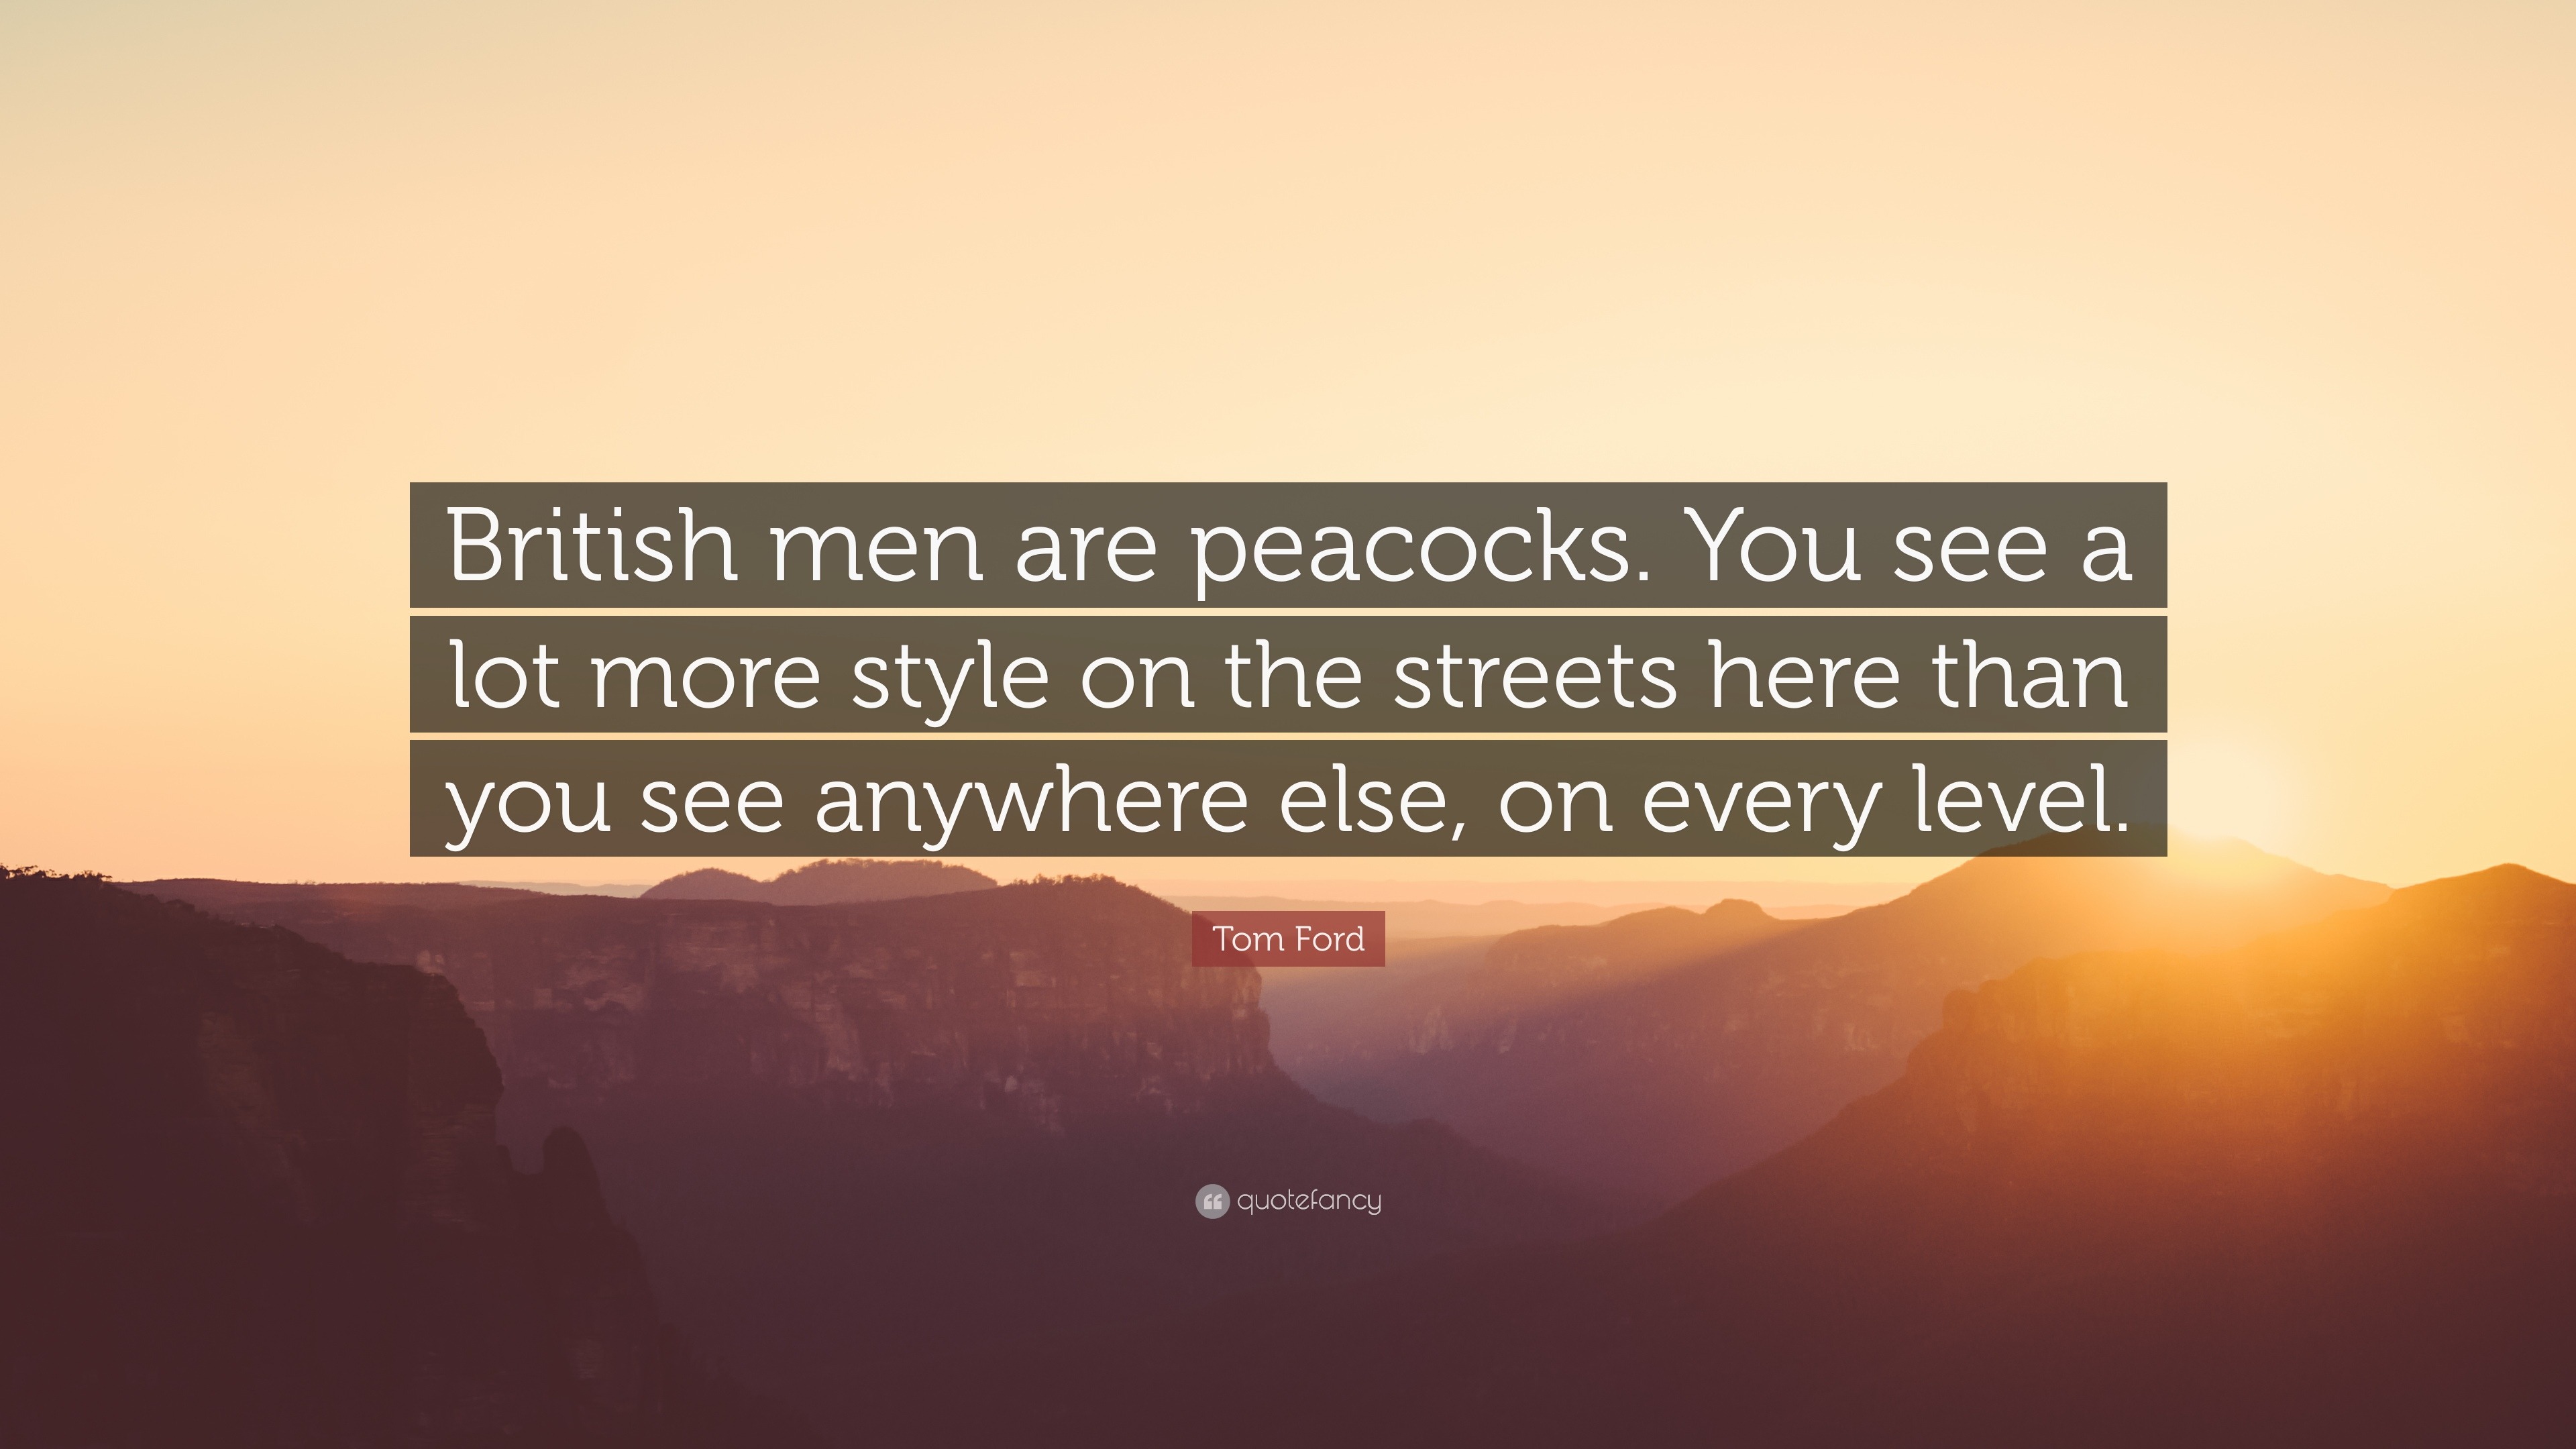 Tom Ford Quote: “British men are peacocks. You see a lot more style on the  streets